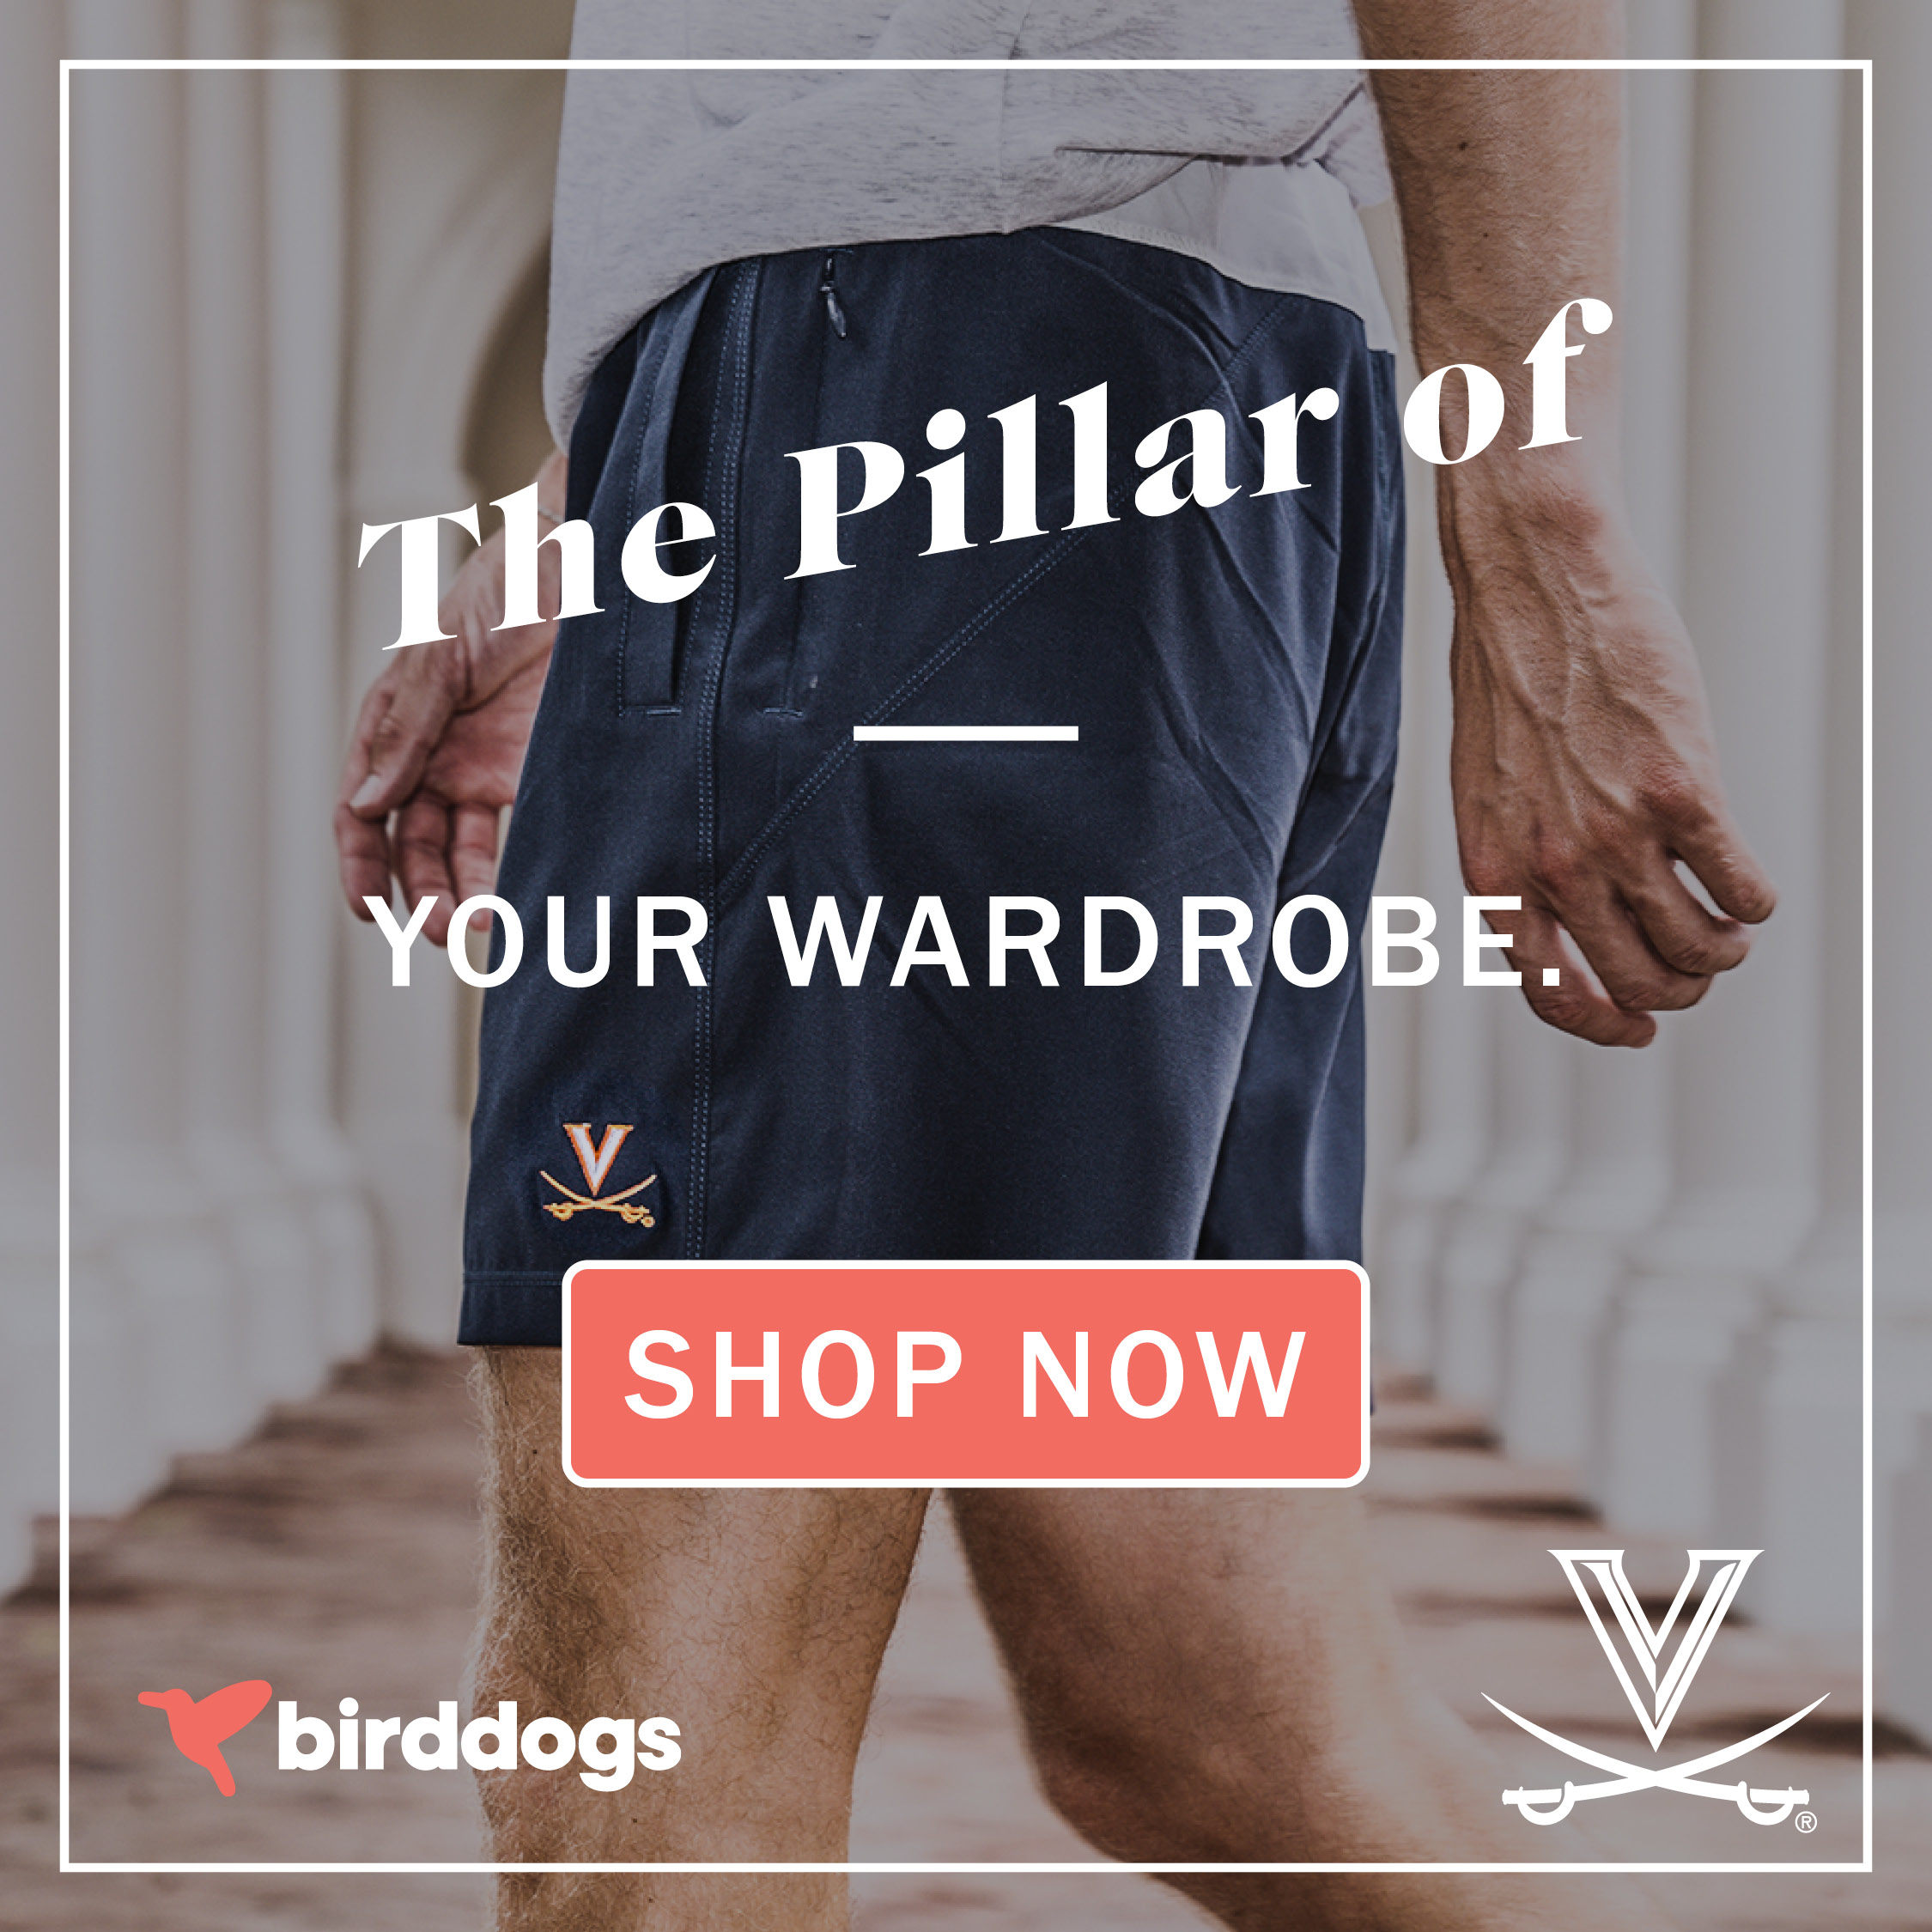 The Pillar of Your Wardrobe, Shop Now